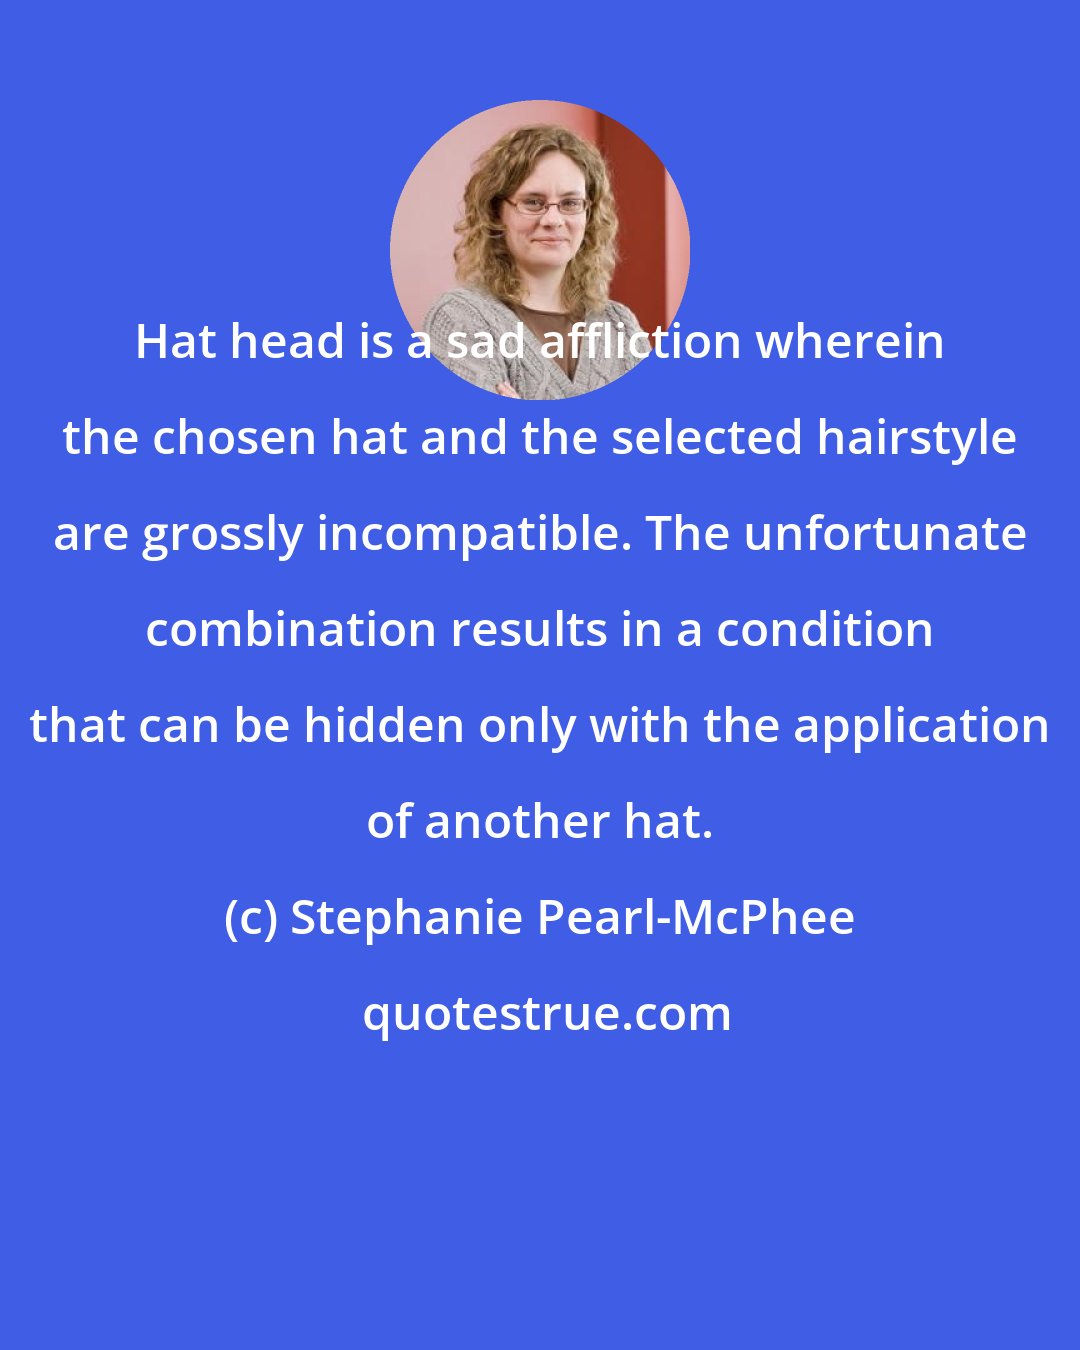 Stephanie Pearl-McPhee: Hat head is a sad affliction wherein the chosen hat and the selected hairstyle are grossly incompatible. The unfortunate combination results in a condition that can be hidden only with the application of another hat.